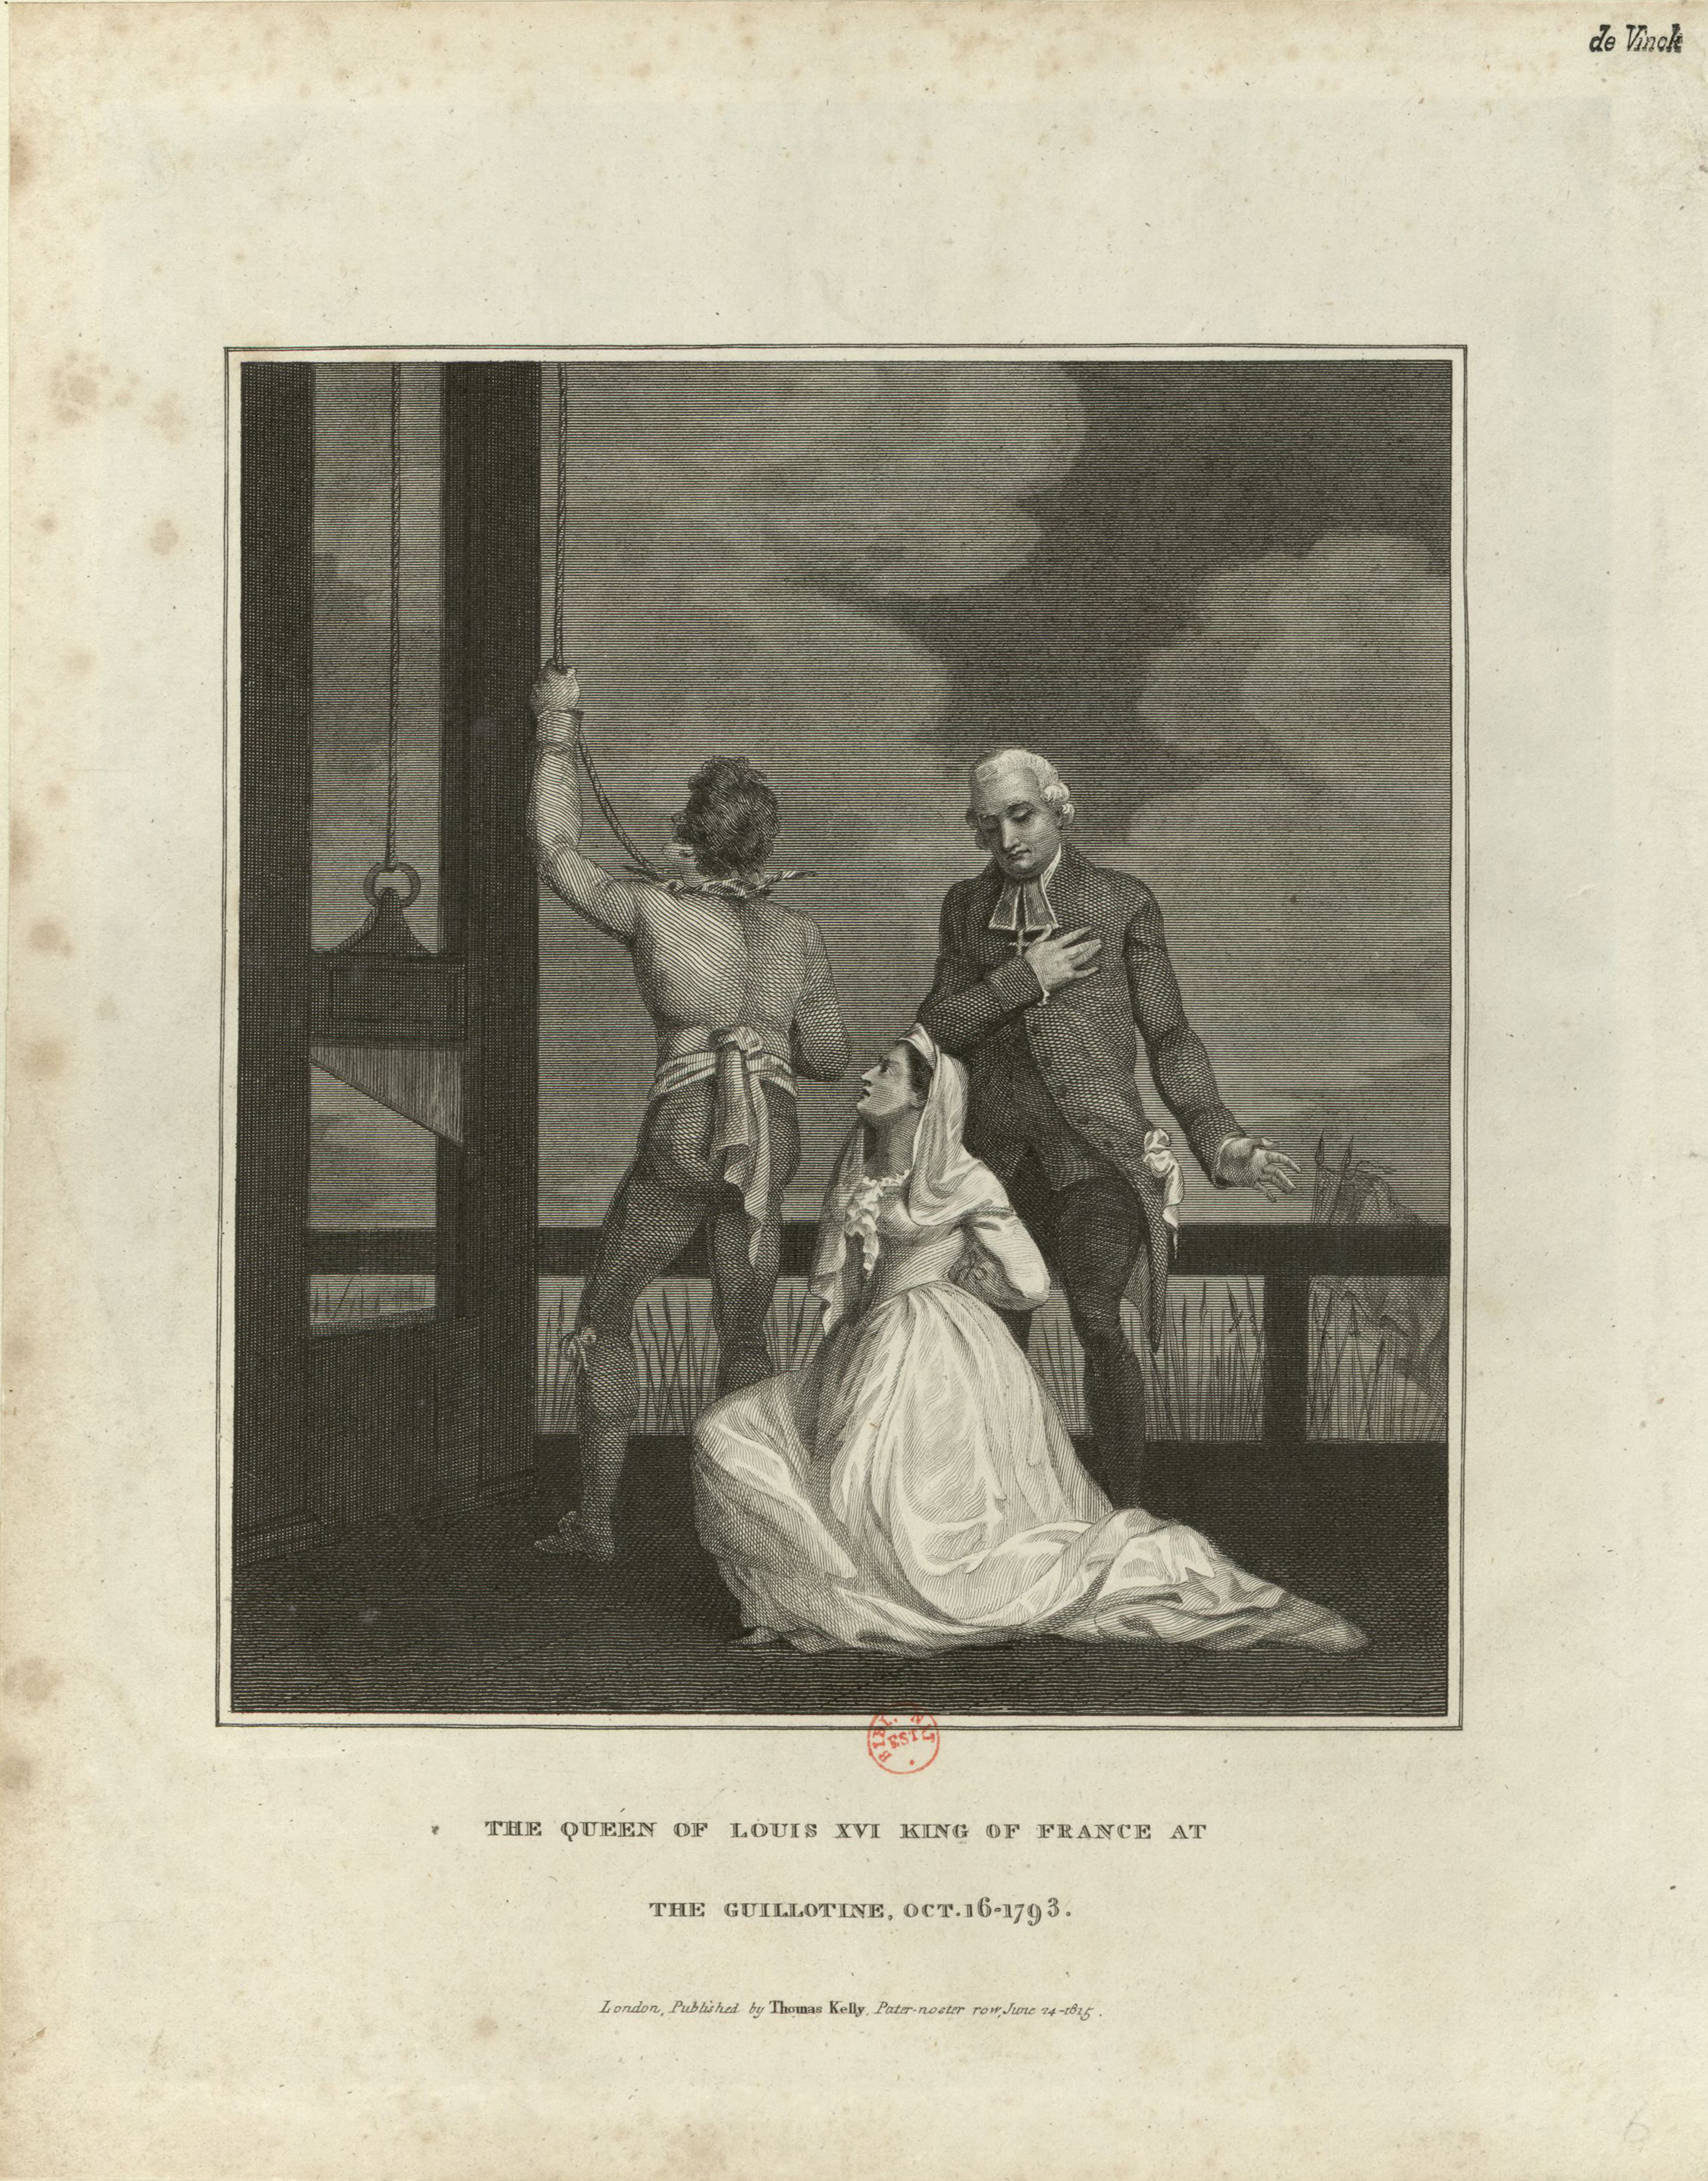 Engraving of Marie Antoinette at the guillotine